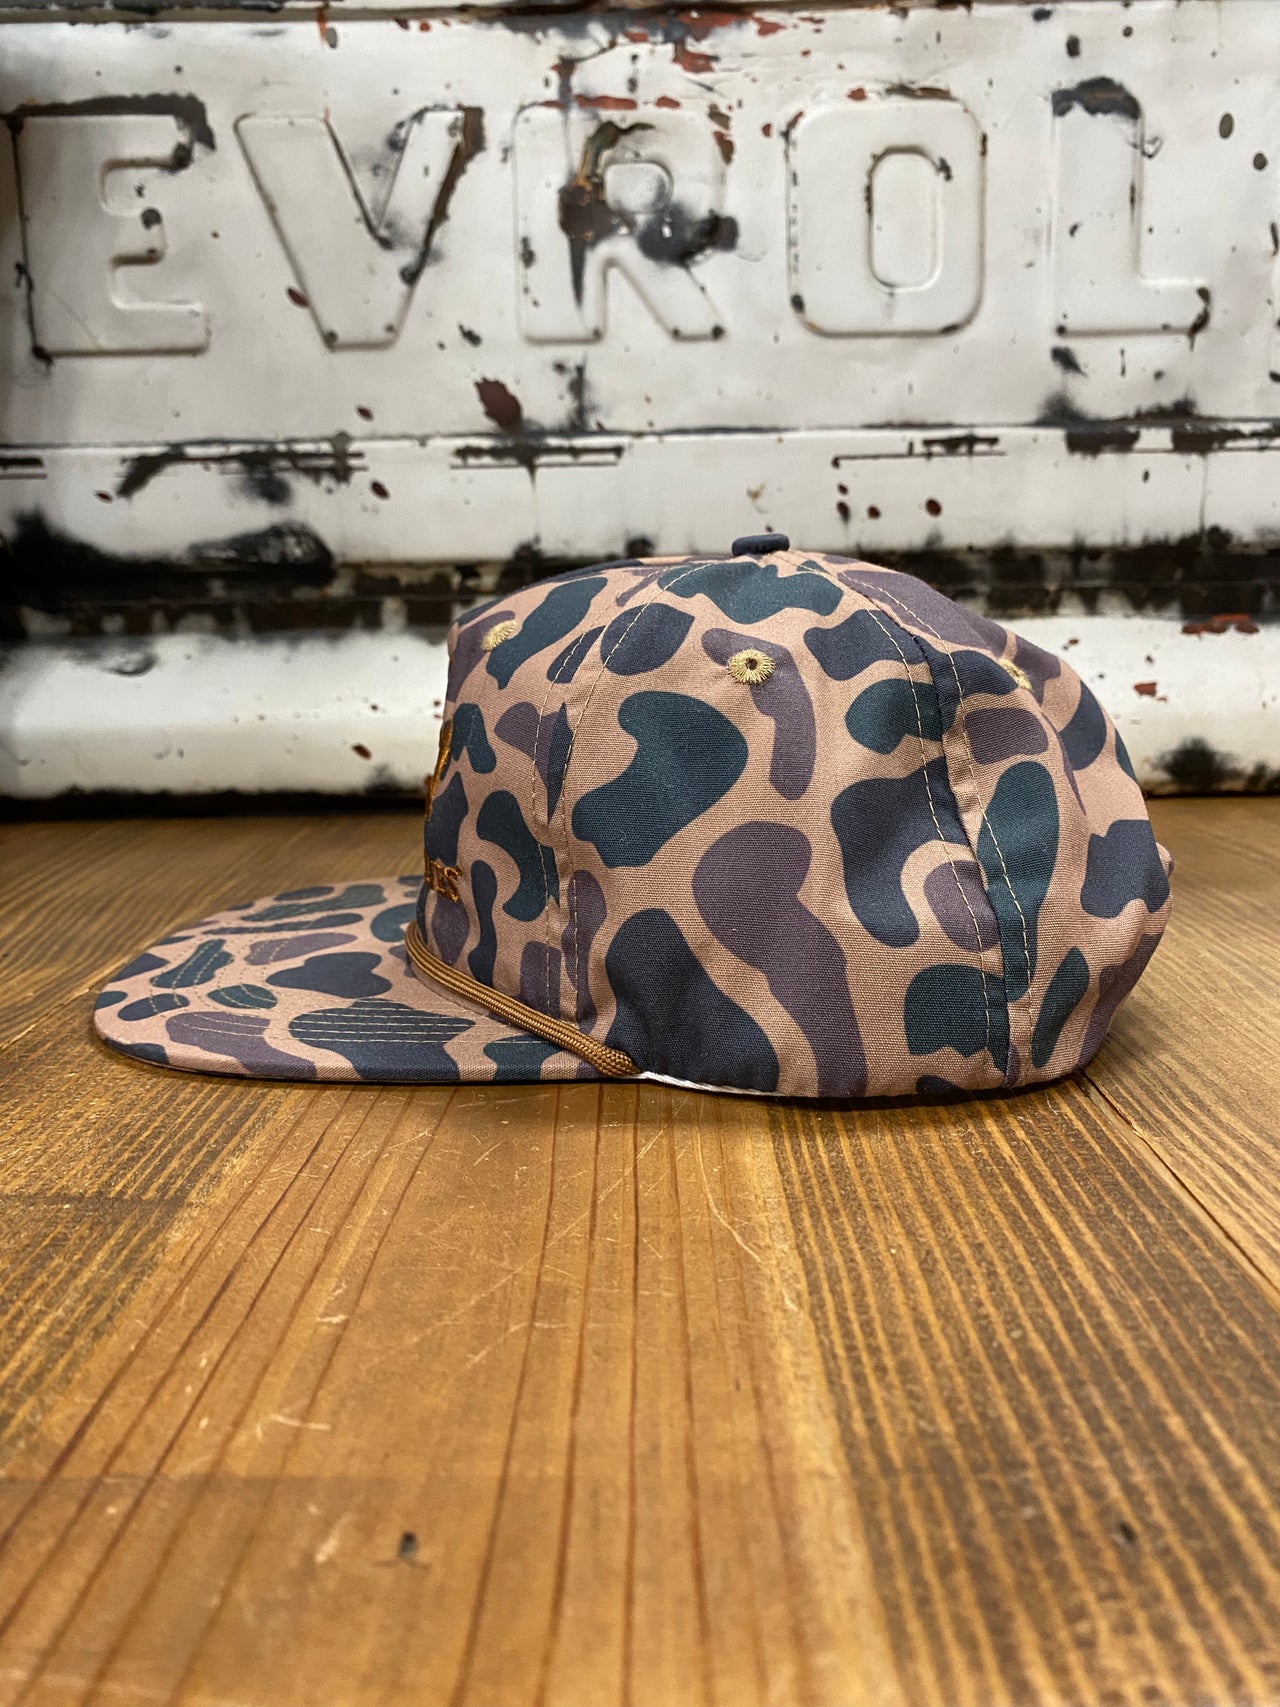 "Speckle Bellies 3 Geese 3D Rope Delta Camo Cap - A 100% cotton, Delta Camo patterned cap with 3D rope detailing of three geese, ideal for outdoor enthusiasts. The cap features a mid-crown design, adjustable snapback closure, and is crafted with durable 550 Paracord for a comfortable and versatile fit. One Size Fits Most."